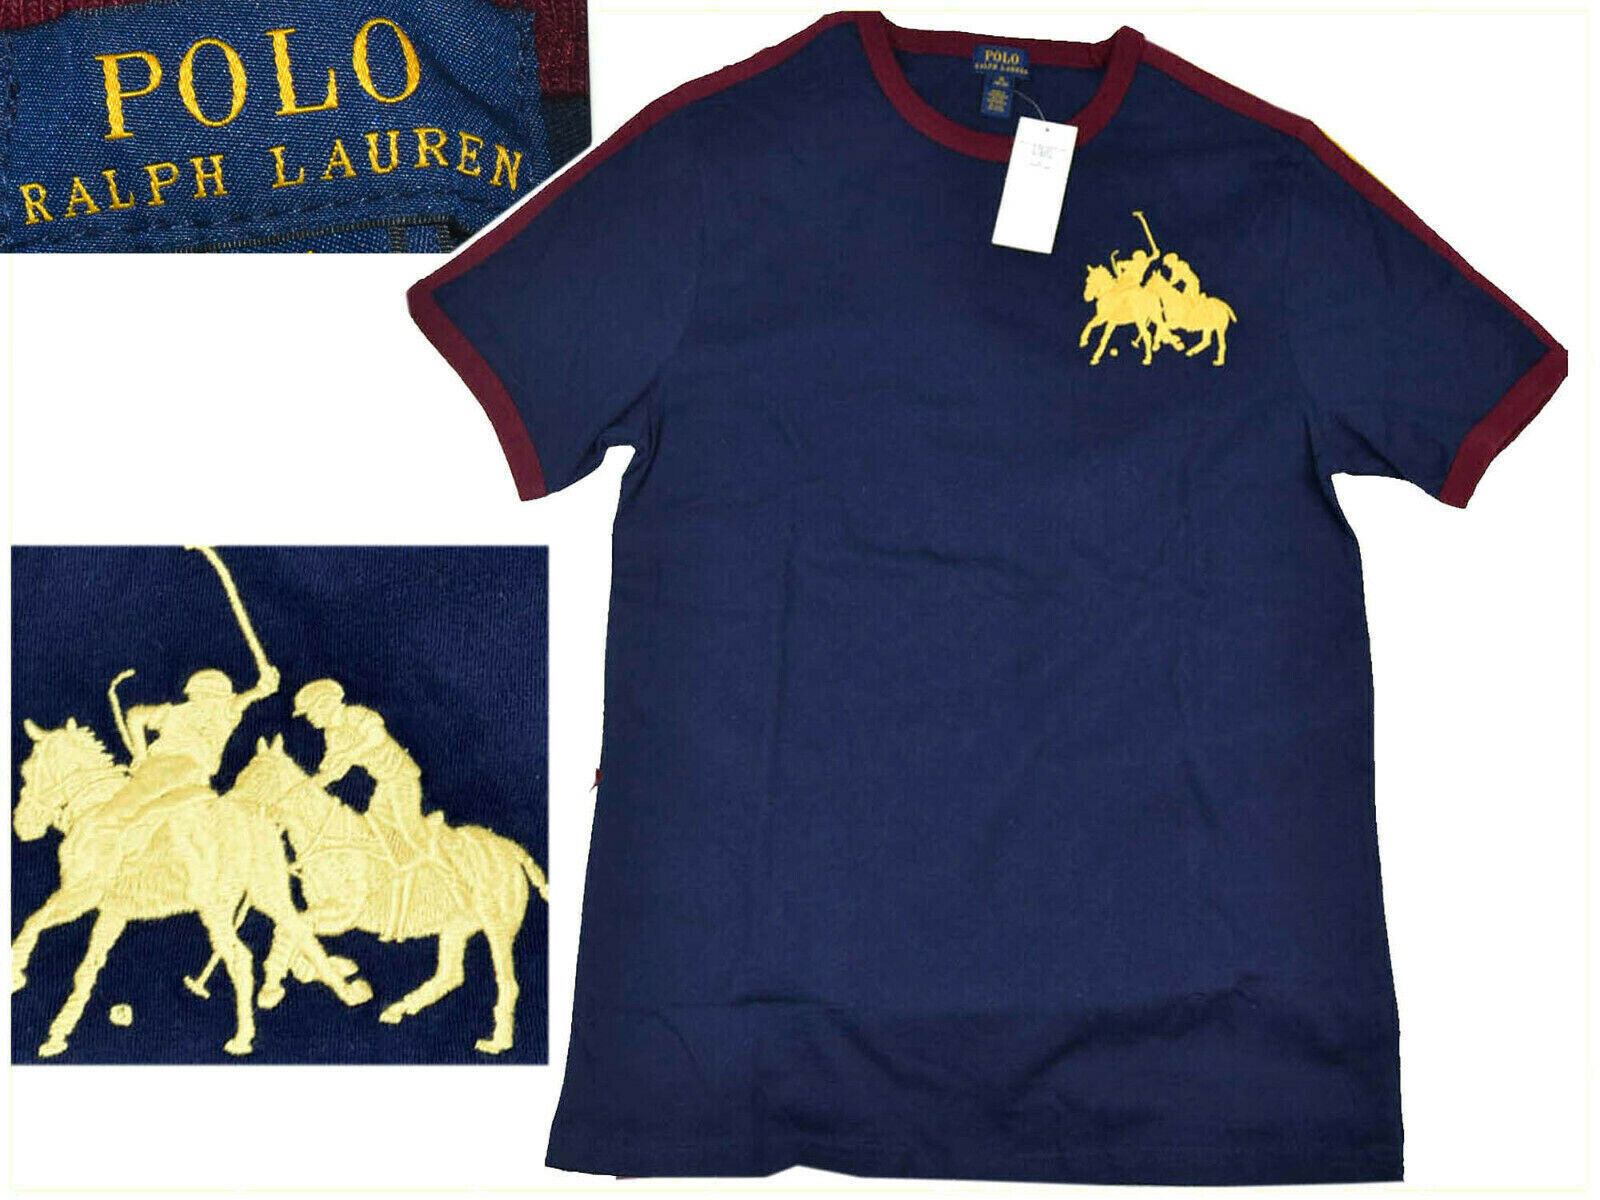 Primary image for RALPH LAUREN Men's T-shirt M European of Man (18-20 Young XL US) RL15 T1G